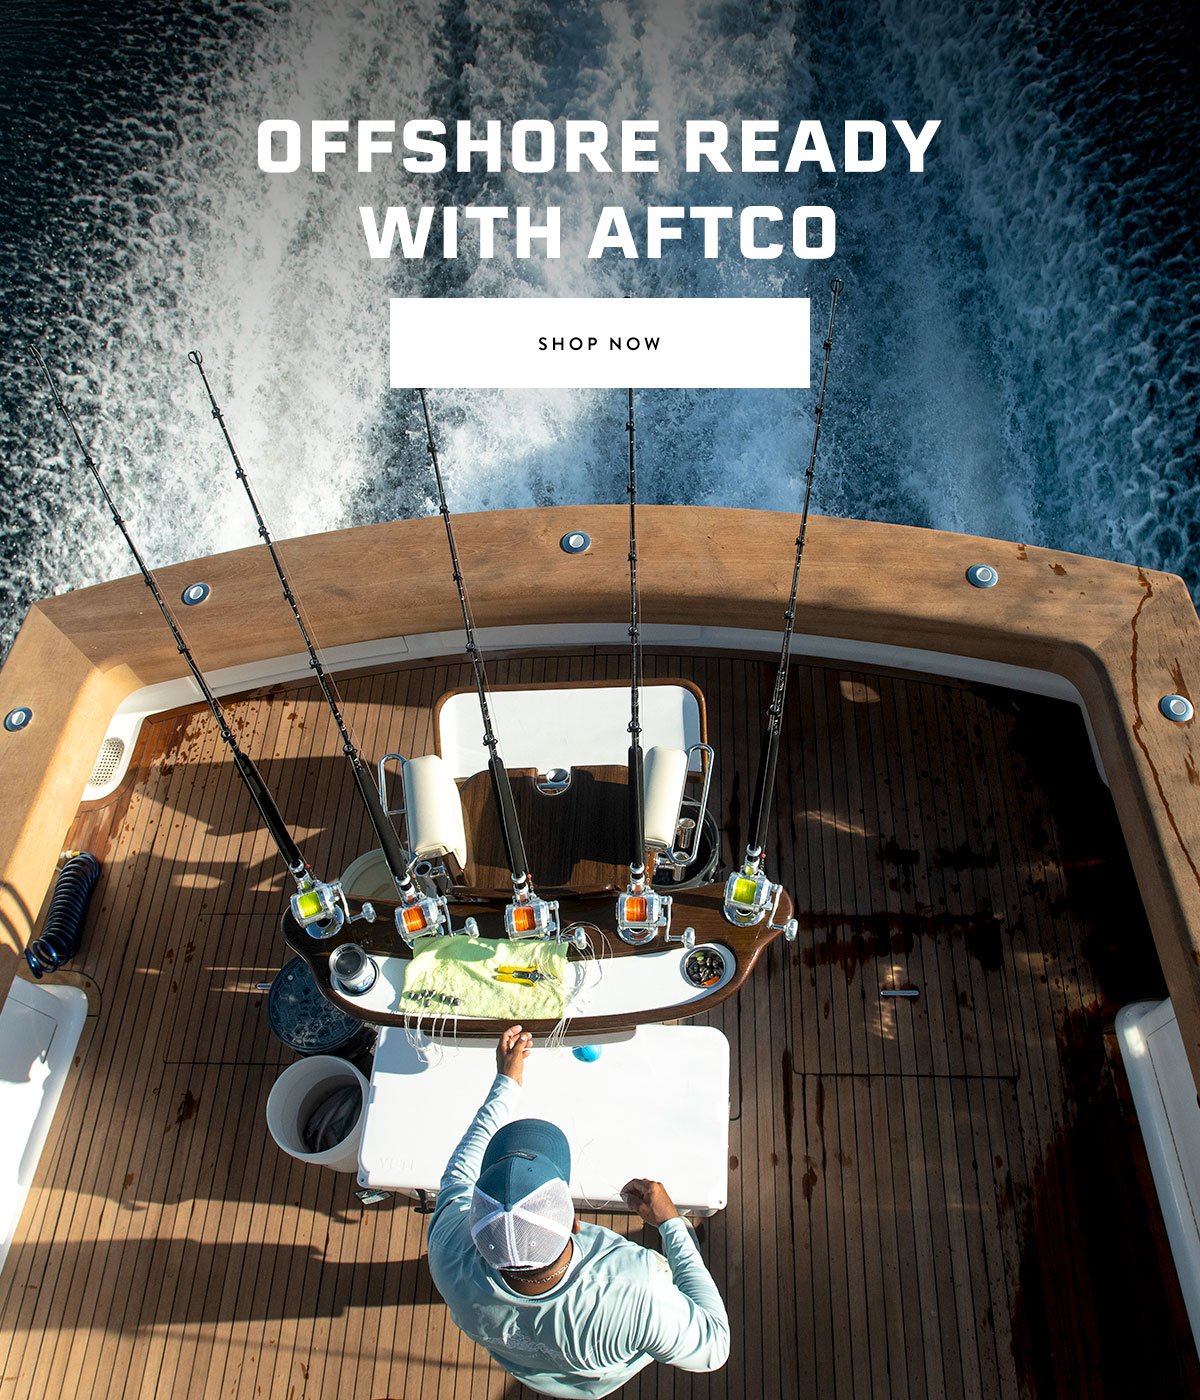 Offshore Ready with AFTCO - Shop Now!